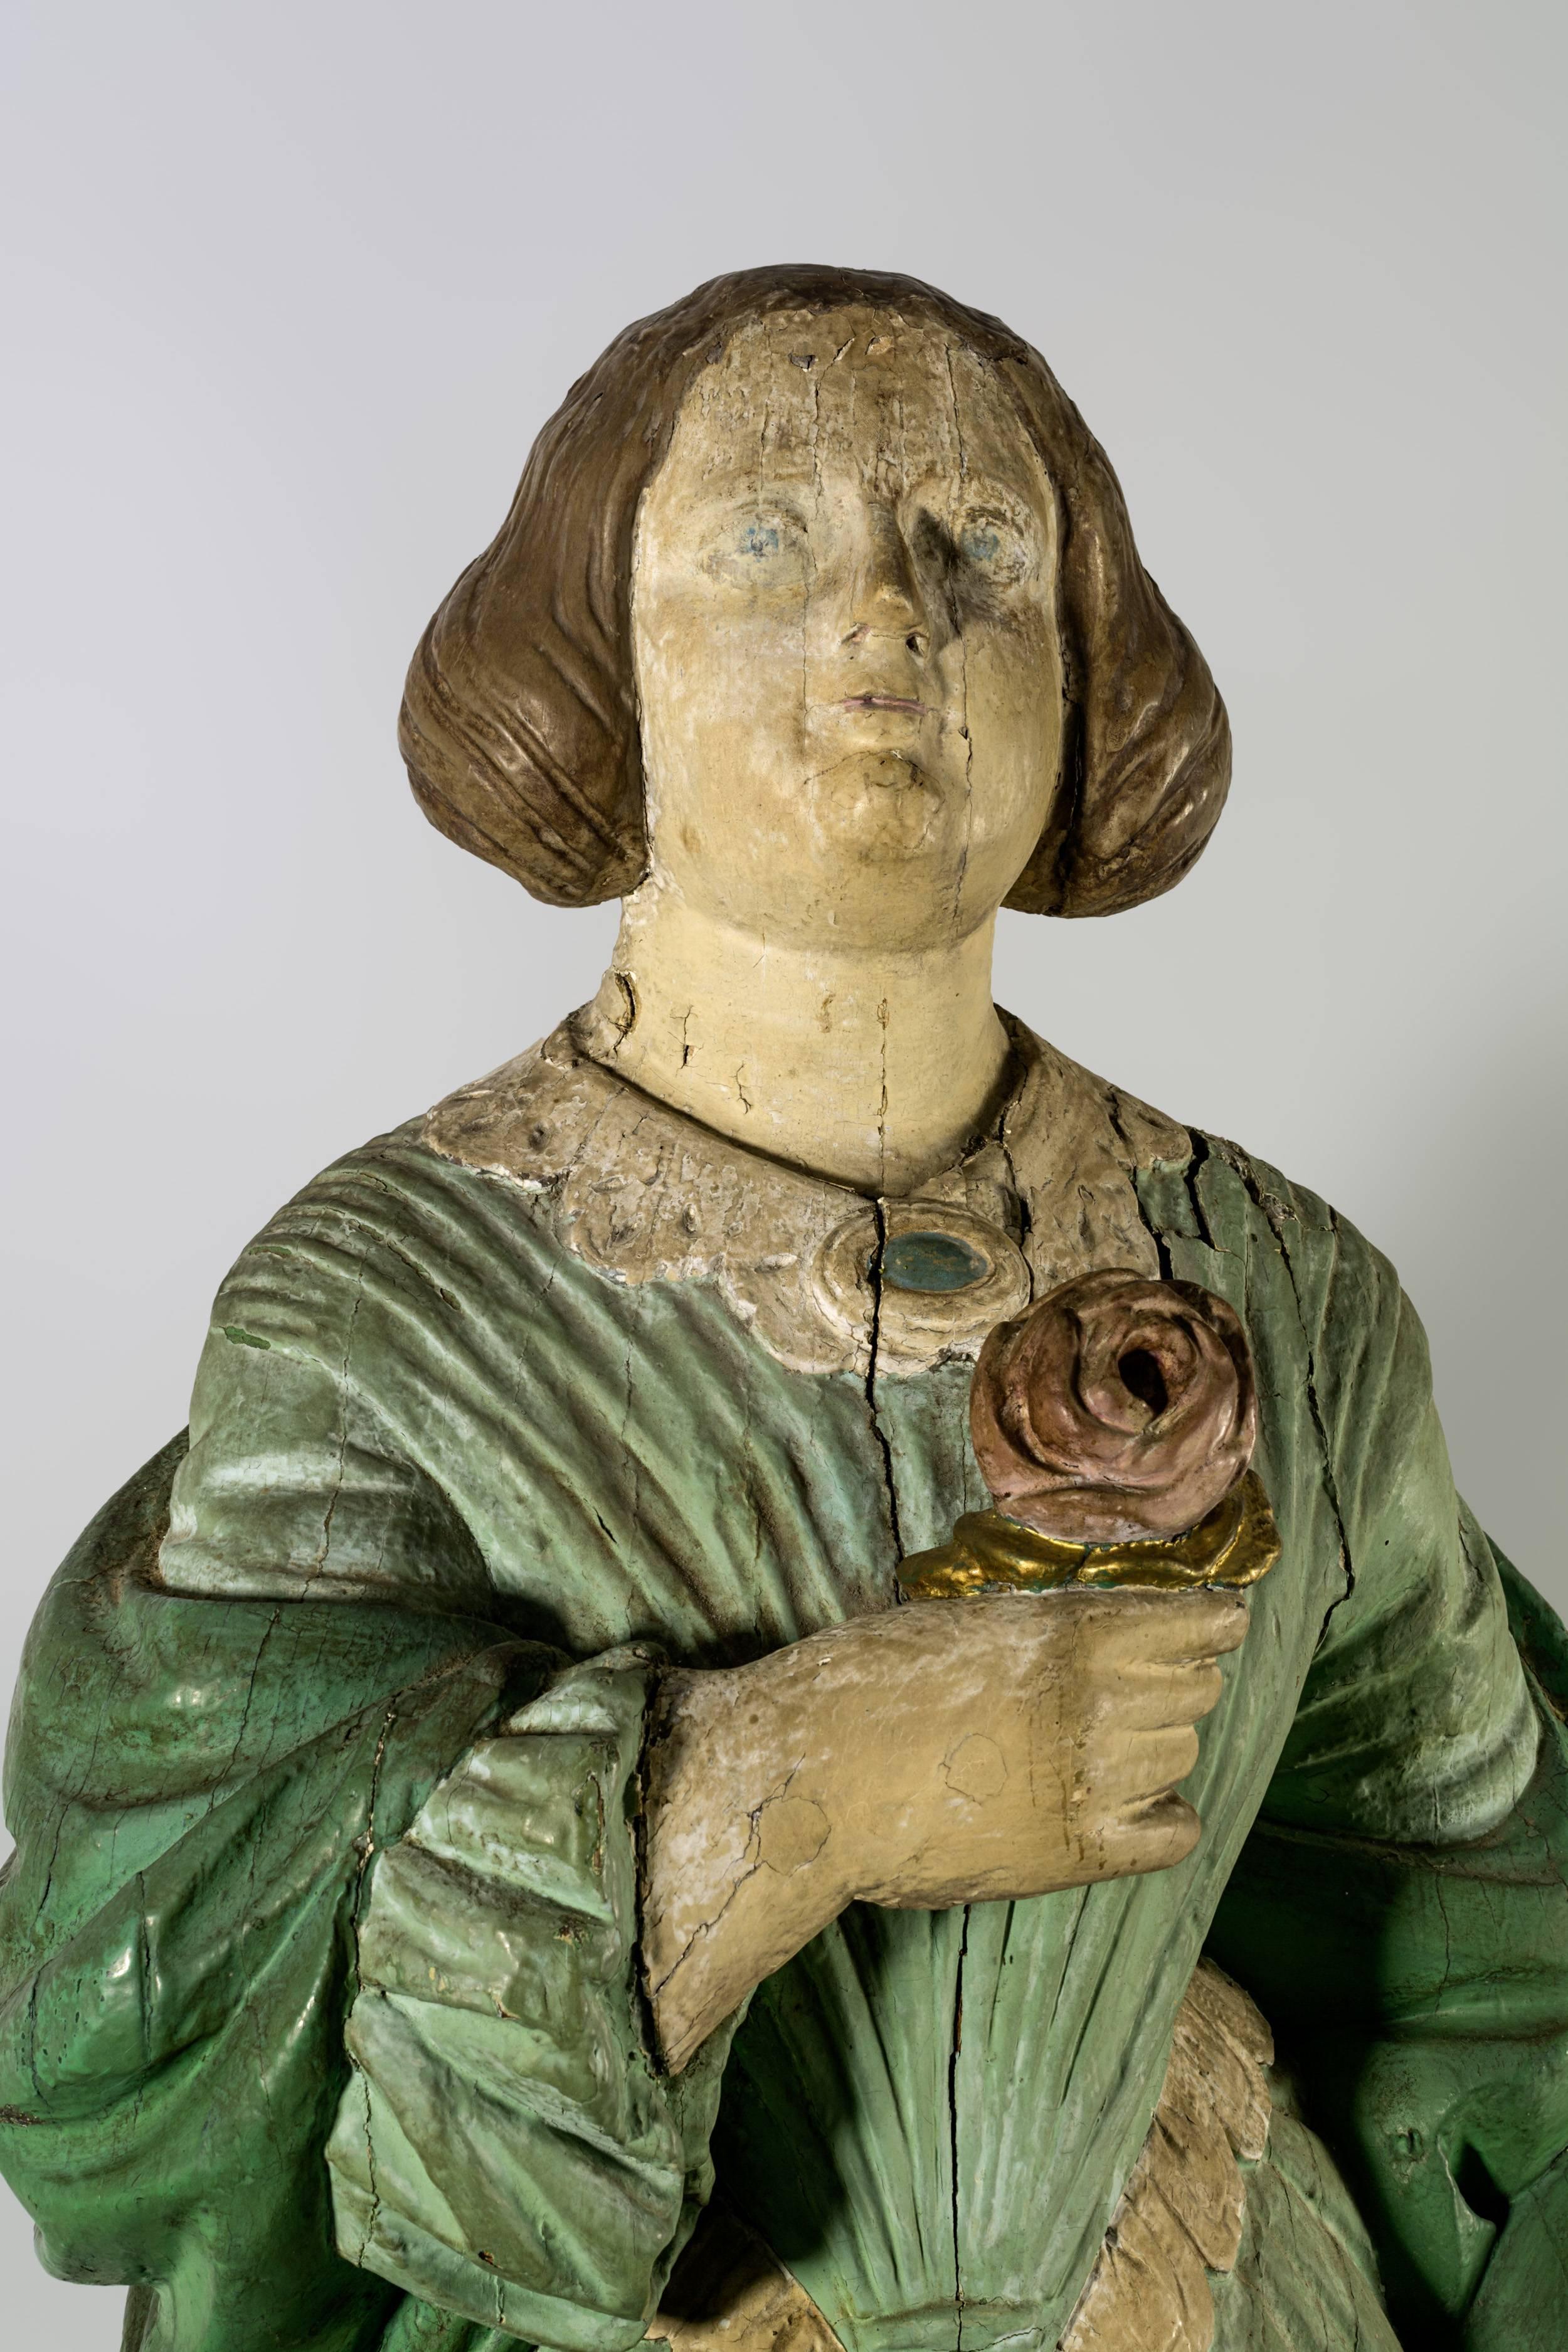 A carved and painted full length ship’s figurehead of a young classical woman dressed in green, with oval brooch necklace, holding a rose. Carved from a solid piece of pine.
English, c,1850, 37 ½”.
 